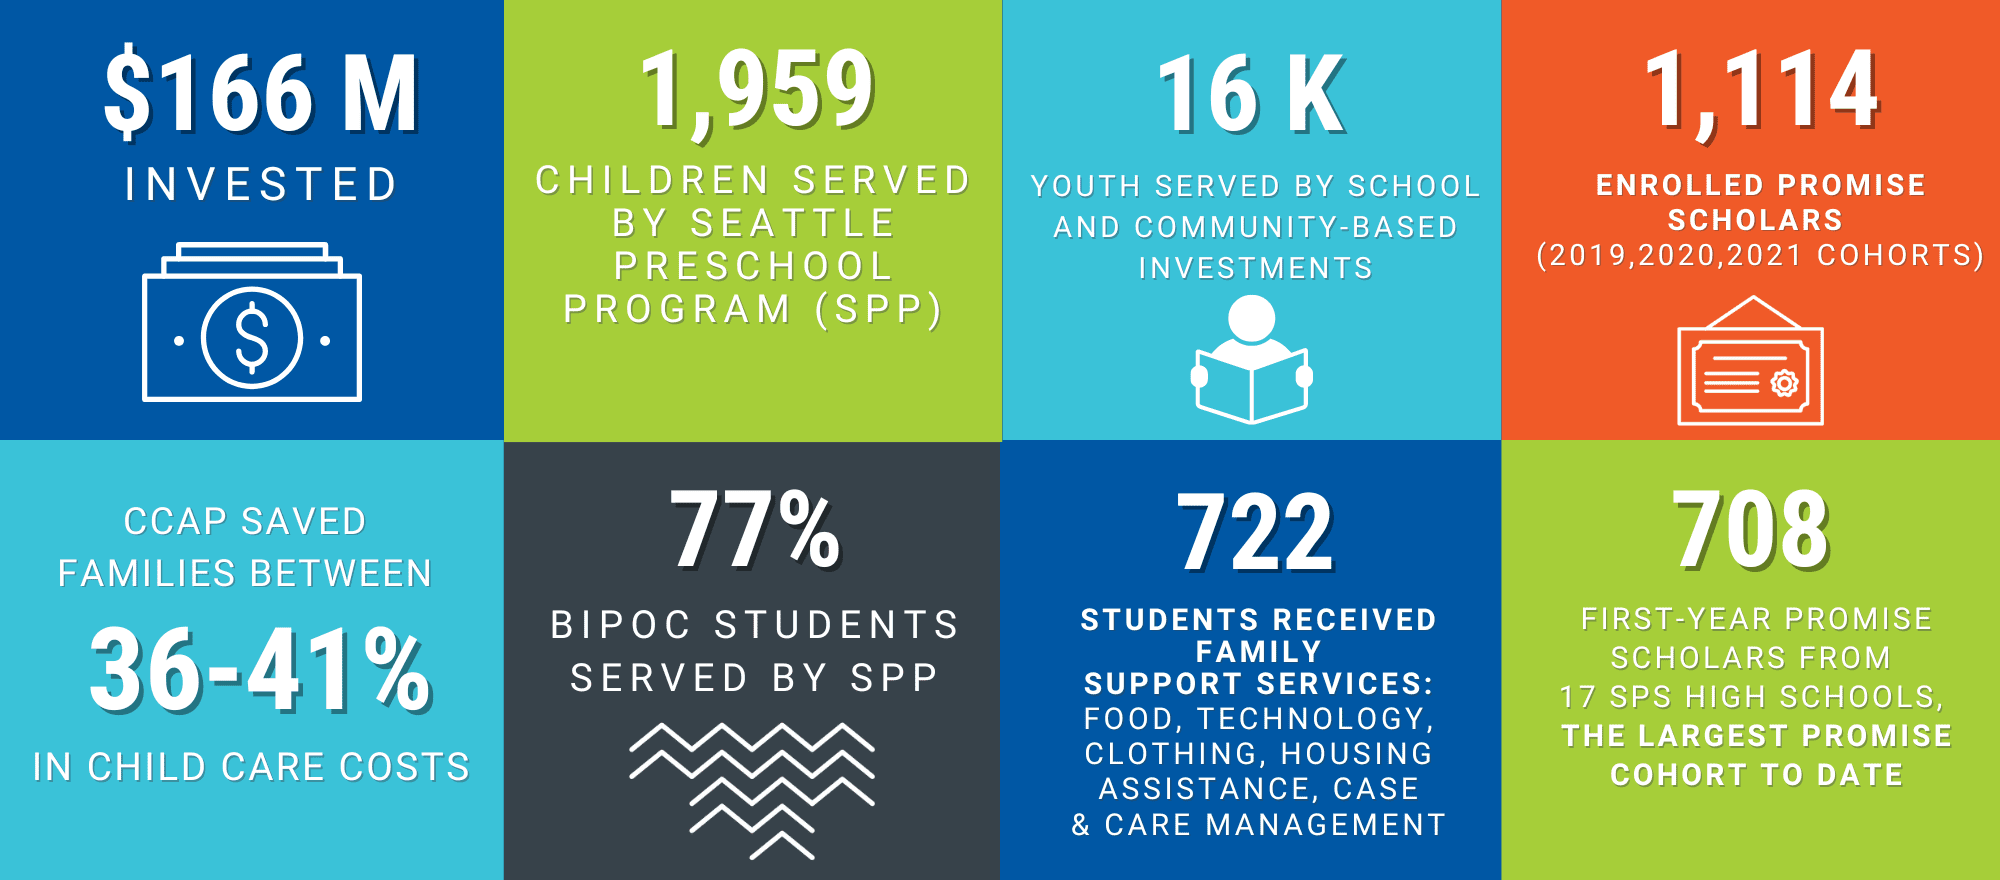 $166 M Invested; 1,959 children served by Seattle Preschool Program, SPP; 16K youth served by school and community-based investments; 1,114 Enrolled Promise Scholars (2019, 2020, 2021 cohorts); CCAP saved families between 36-41% in child care costs; 722 students received family support services: food, technology, clothing, housing assistance, case & care management; 708 first-year scholars from 17 SPS high schools, the largest Promise cohort to date. 